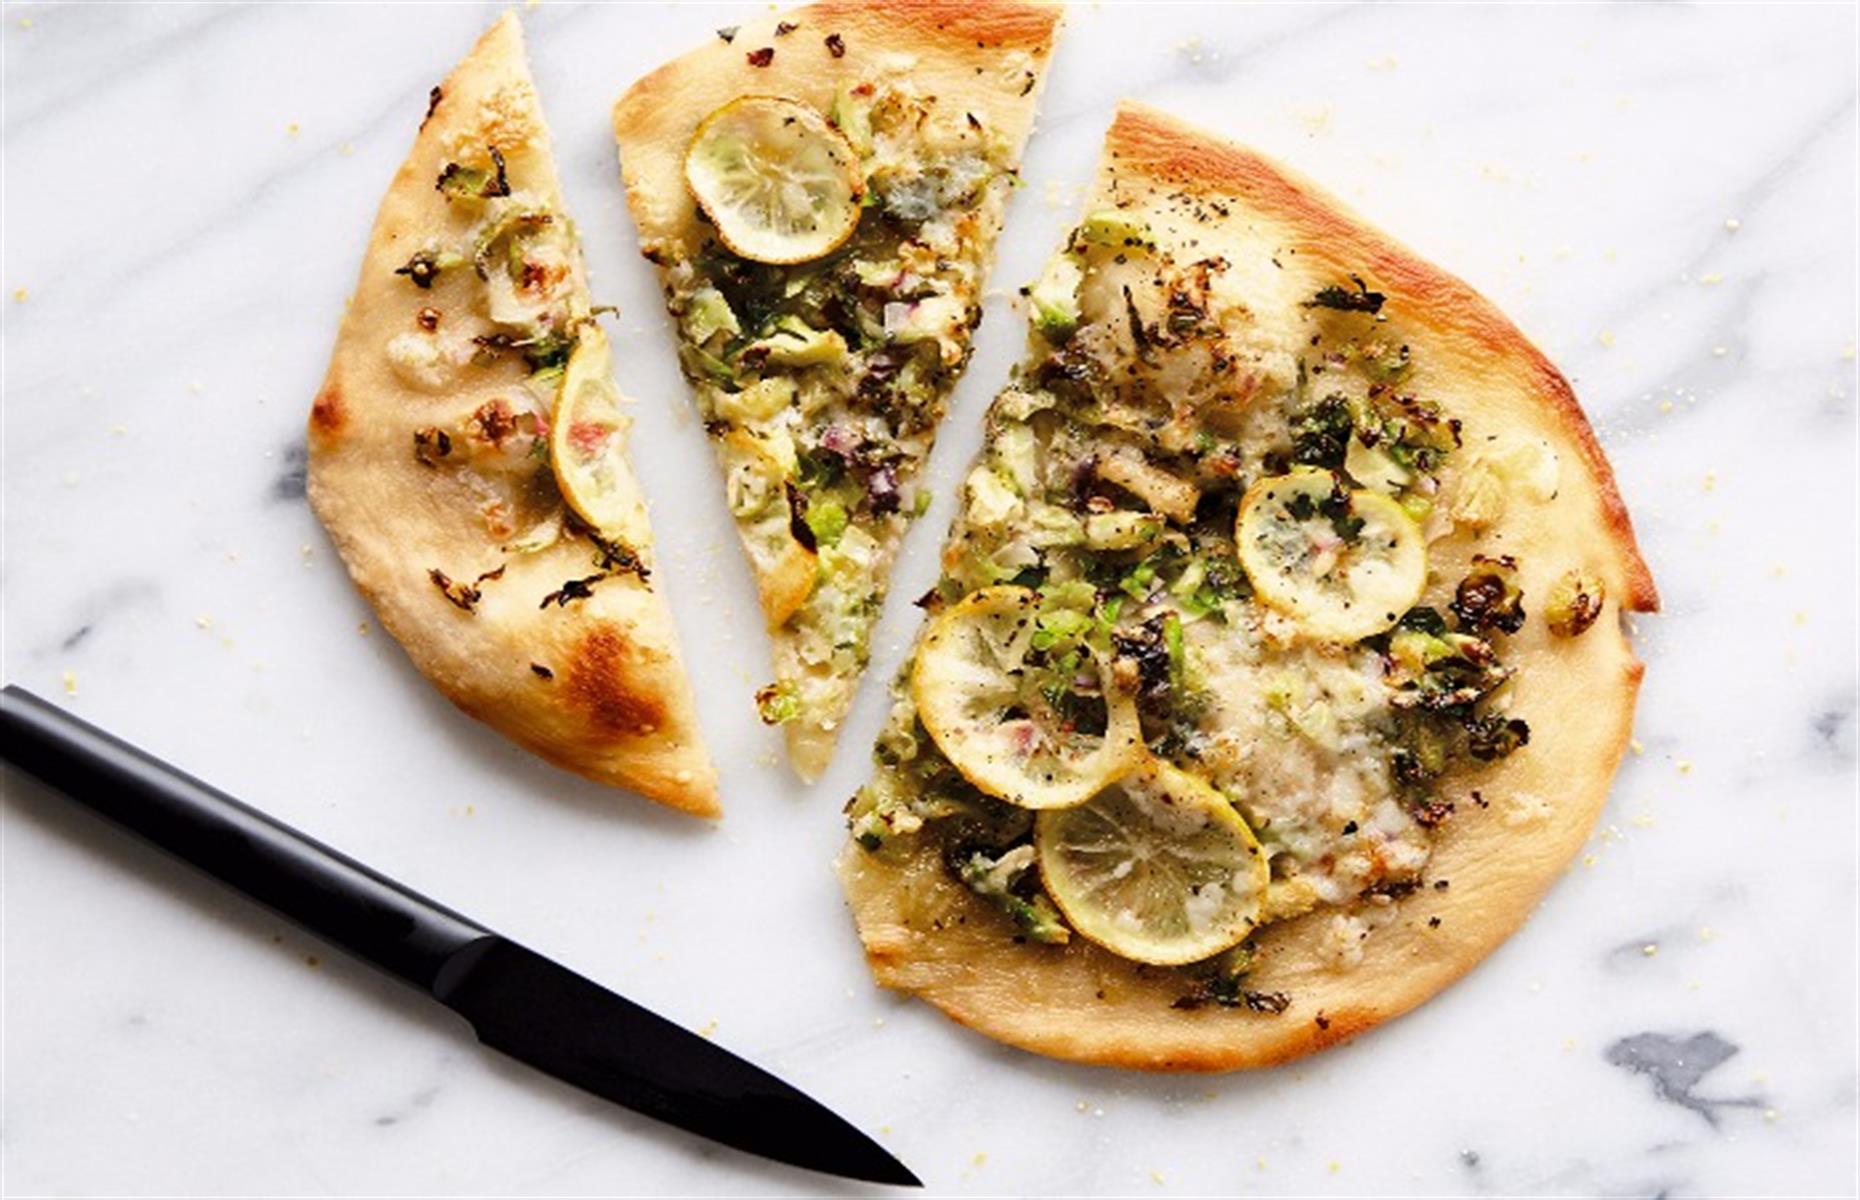 <p>Pizza is pretty tough on vegans, without that lovely bubbling cheese. But this recipe uses vegan mozzarella, which is not a bad substitute, plus shredded shallots, Brussels sprouts and slices of roasted lemon which have a very intense citrus flavor.</p>  <p><a href="https://www.lovefood.com/recipes/68142/vegan-pizza-recipe"><strong>Get the recipe for vegan pizza here</strong></a></p>